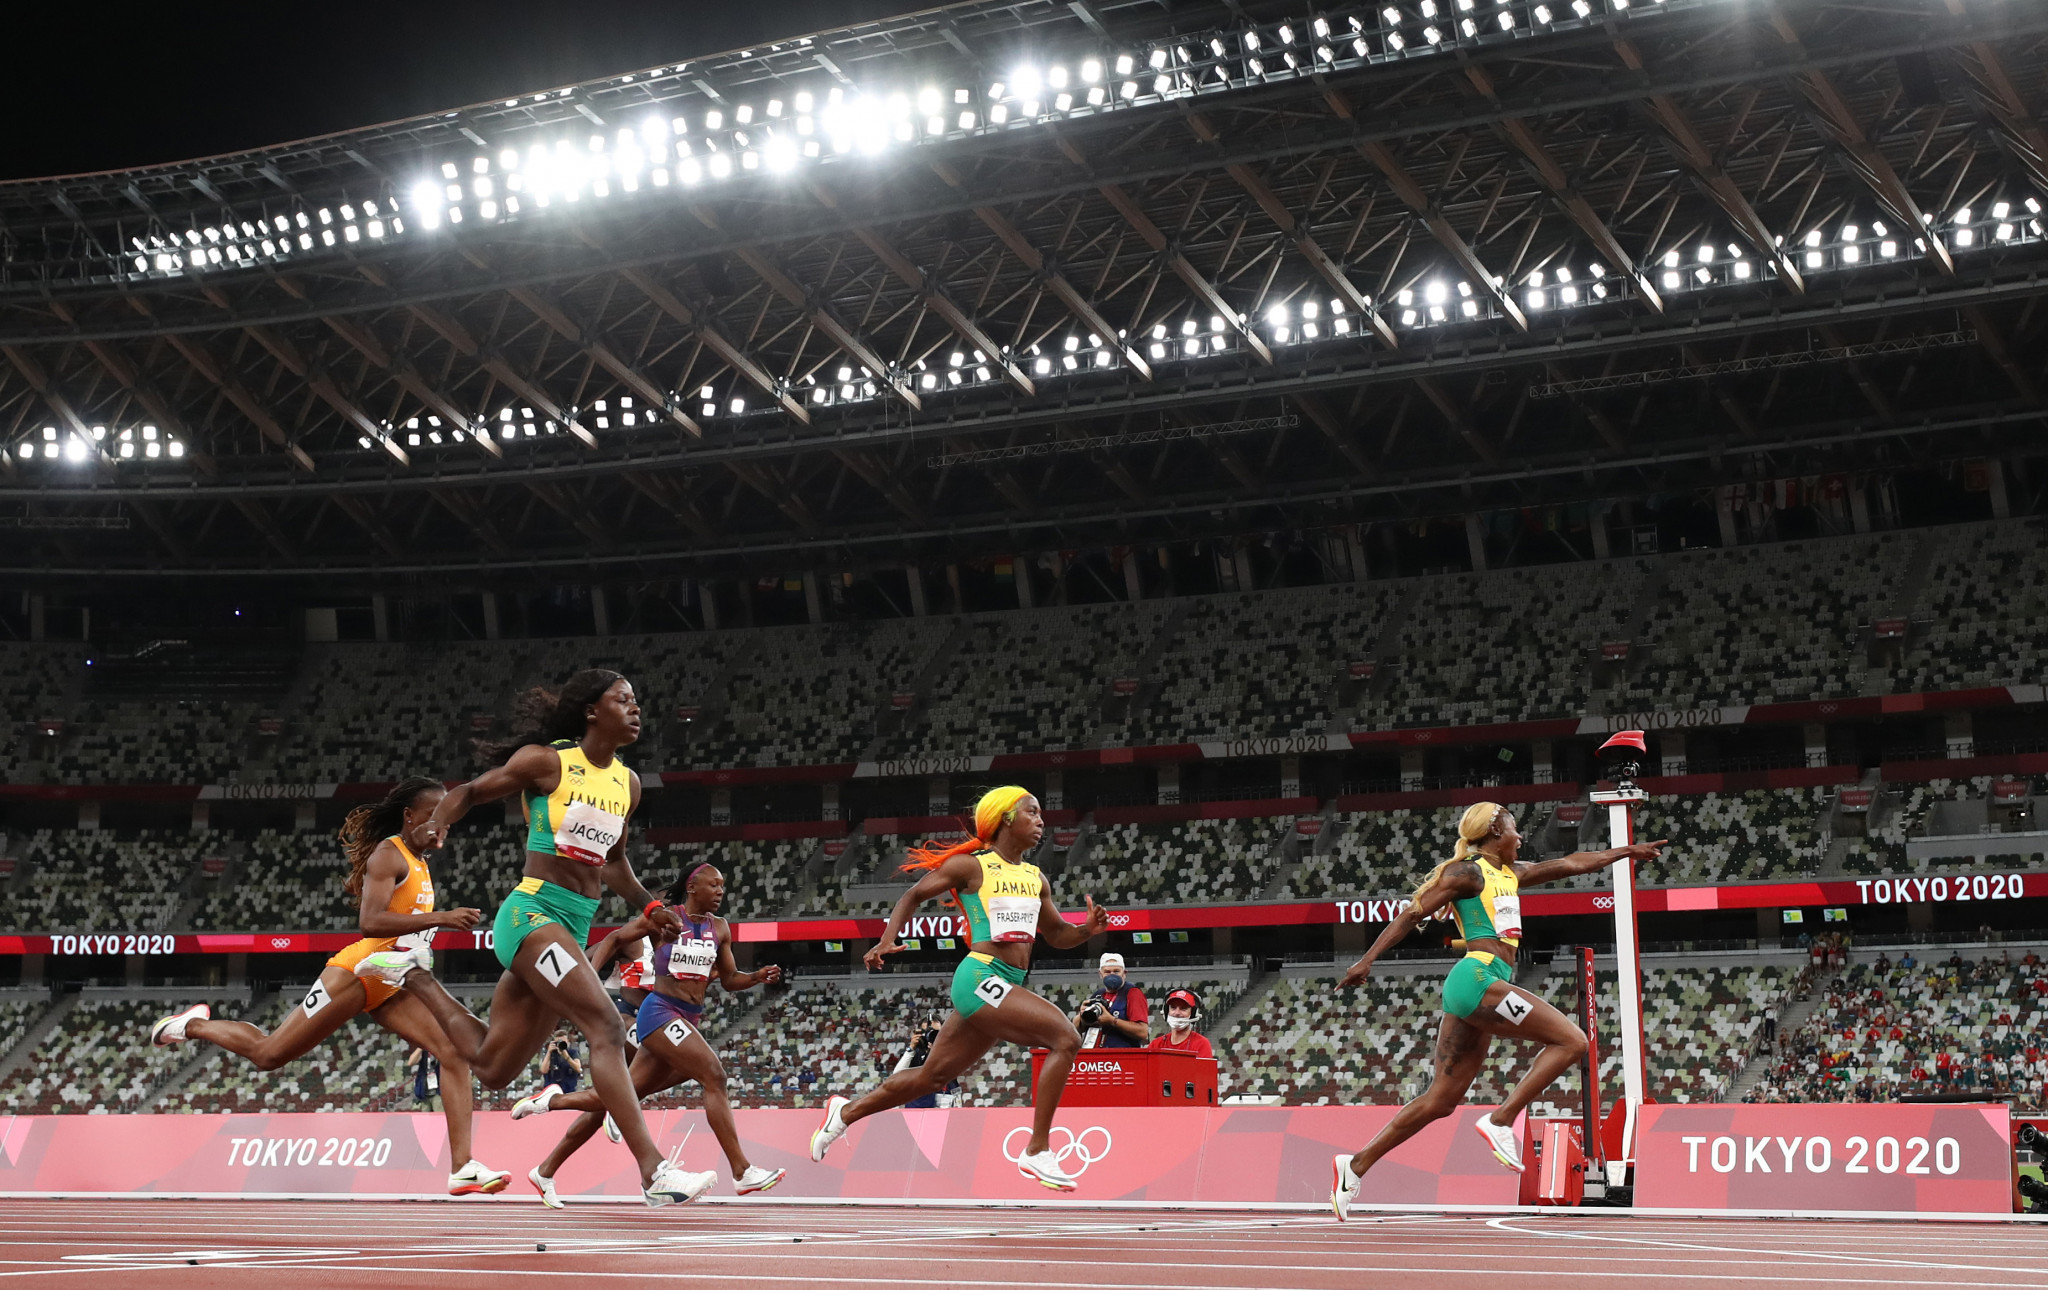 Fraser-Pryce, centre, was edged out by team-mate Thompson-Herah in the 100m Olympic final in Tokyo ©Getty Images